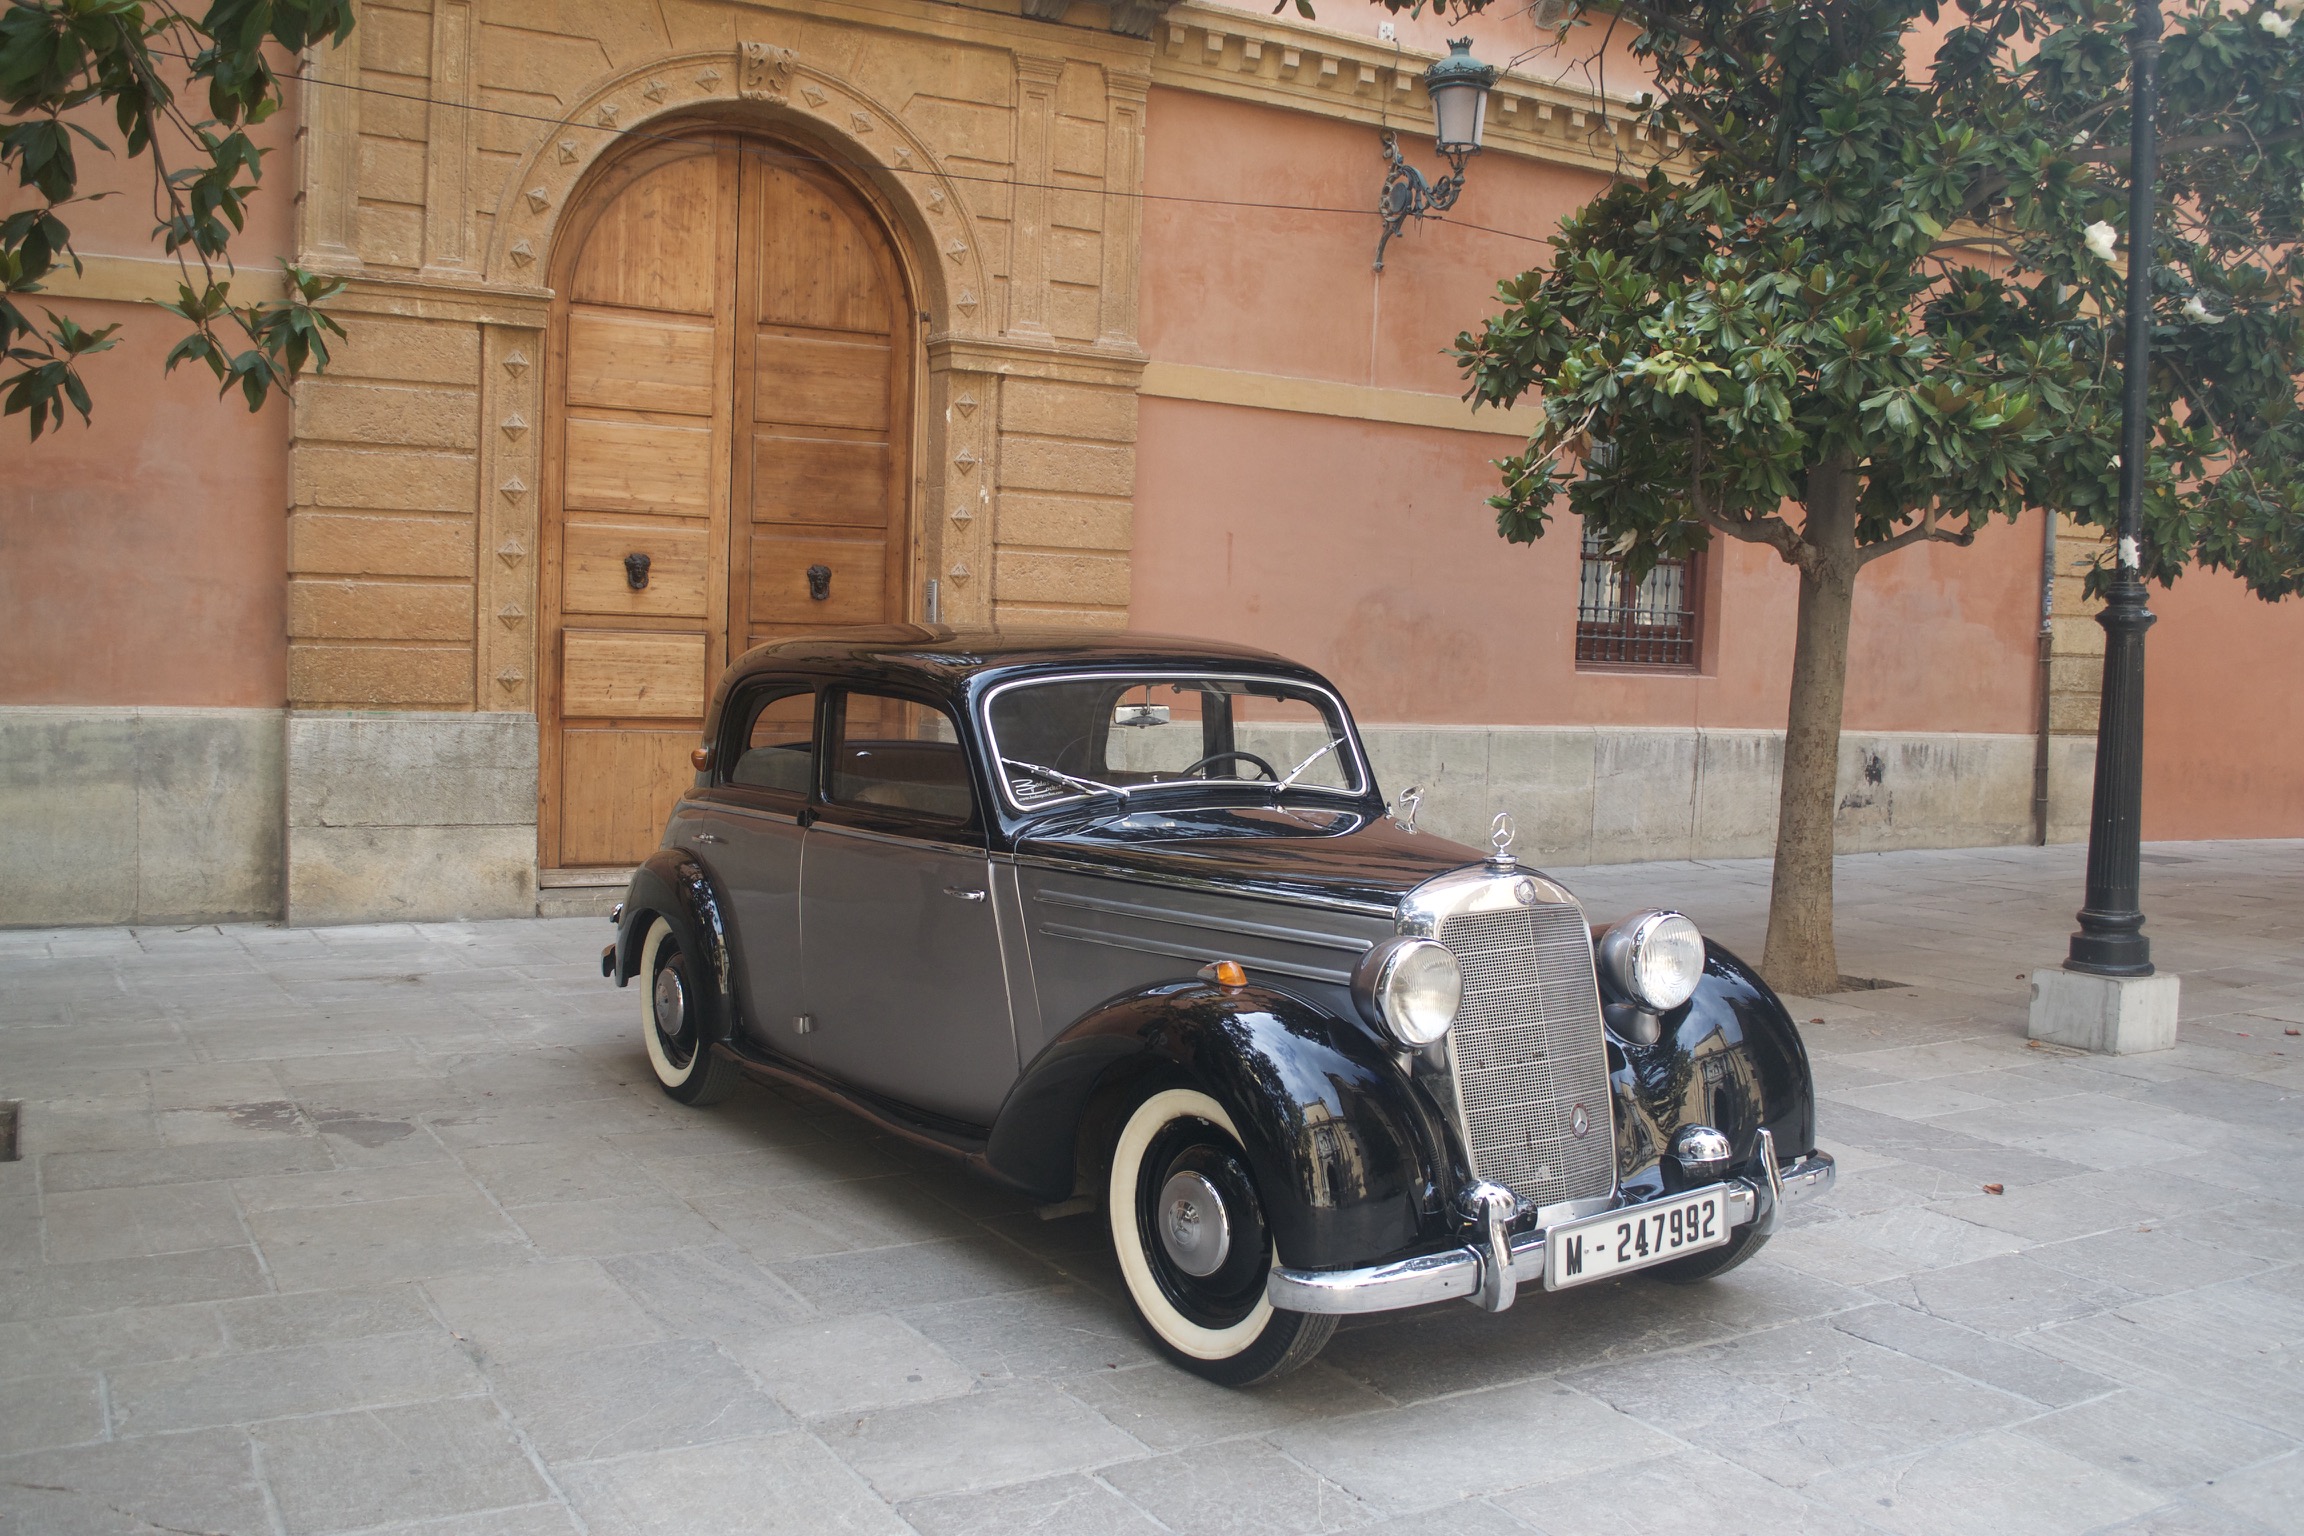 A classic black and gray Mercedes sits in a plaza before a Spanish building's large wooden doors.